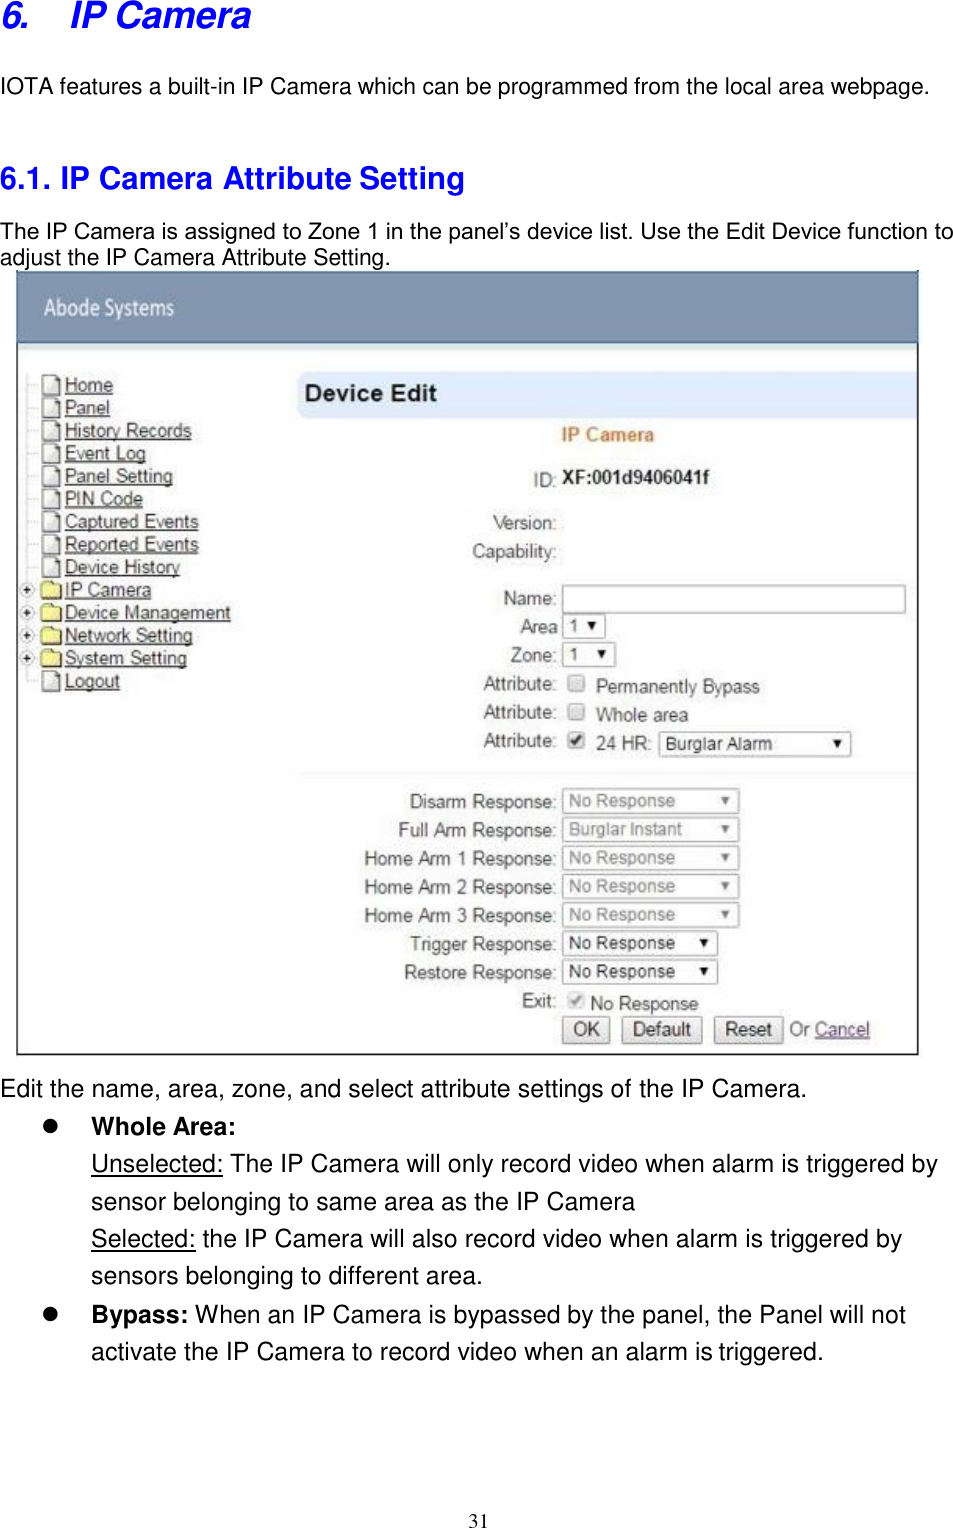 31  6. IP Camera IOTA features a built-in IP Camera which can be programmed from the local area webpage.   6.1. IP Camera Attribute Setting The IP Camera is assigned to Zone 1 in the panel’s device list. Use the Edit Device function to adjust the IP Camera Attribute Setting.            Edit the name, area, zone, and select attribute settings of the IP Camera.  Whole Area: Unselected: The IP Camera will only record video when alarm is triggered by sensor belonging to same area as the IP Camera Selected: the IP Camera will also record video when alarm is triggered by sensors belonging to different area.  Bypass: When an IP Camera is bypassed by the panel, the Panel will not activate the IP Camera to record video when an alarm is triggered. 